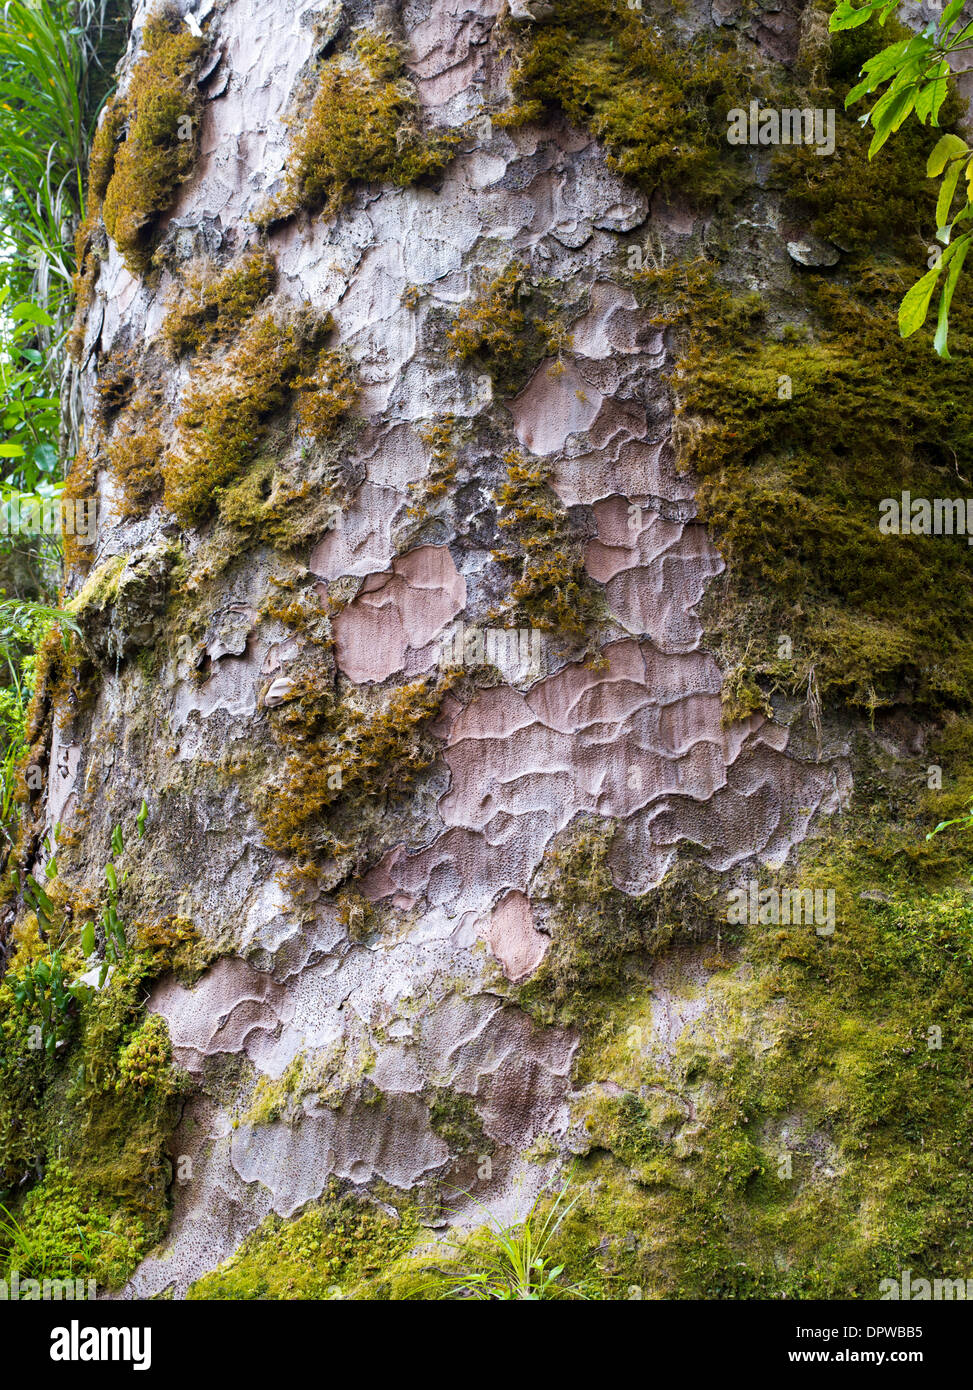 Closeup view of a rare, endangered kauri tree (Agathis australis) from a small grove in Northland, New Zealand Stock Photo